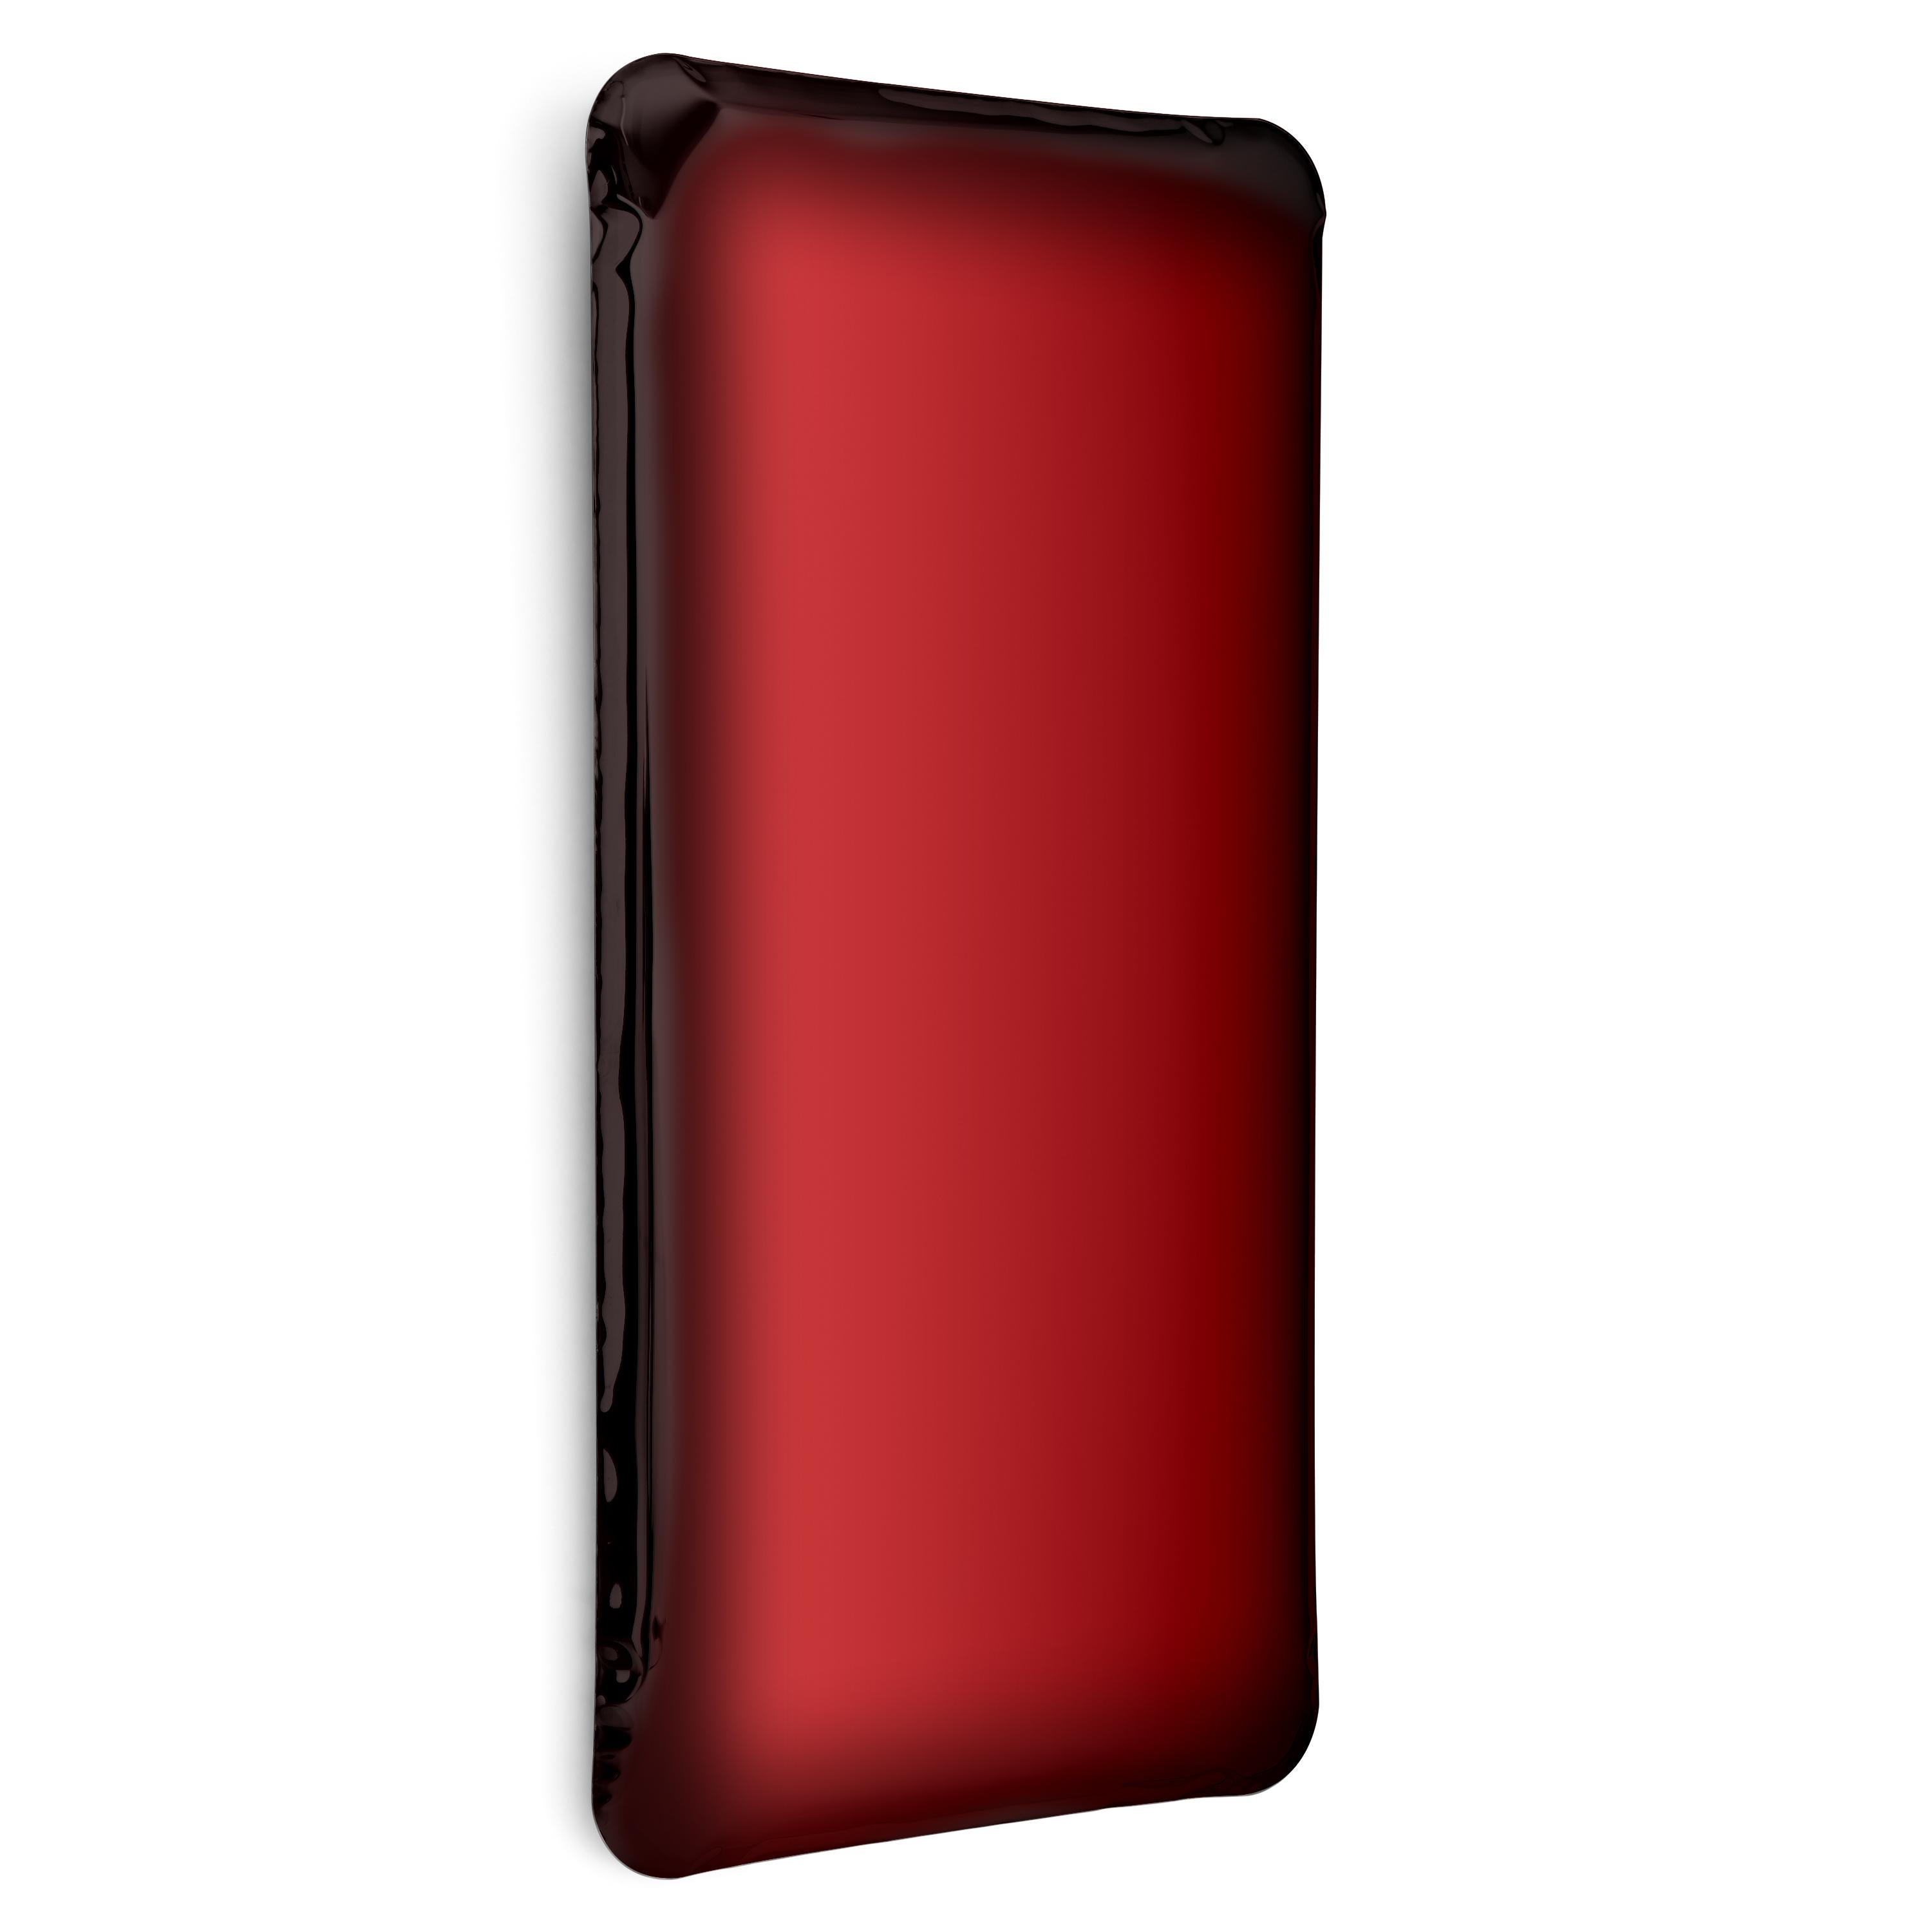 Red Rubin Tafla Q2 sculptural wall mirror by Zieta
Dimensions: D 6 x W 60 x H 120 cm 
Material: Stainless steel. 
Finish: Red Rubin.
Available in finishes: Stainless Steel, Deep Space Blue, Emerald, Saphire, Saphire/Emerald, Dark Matter, and Red